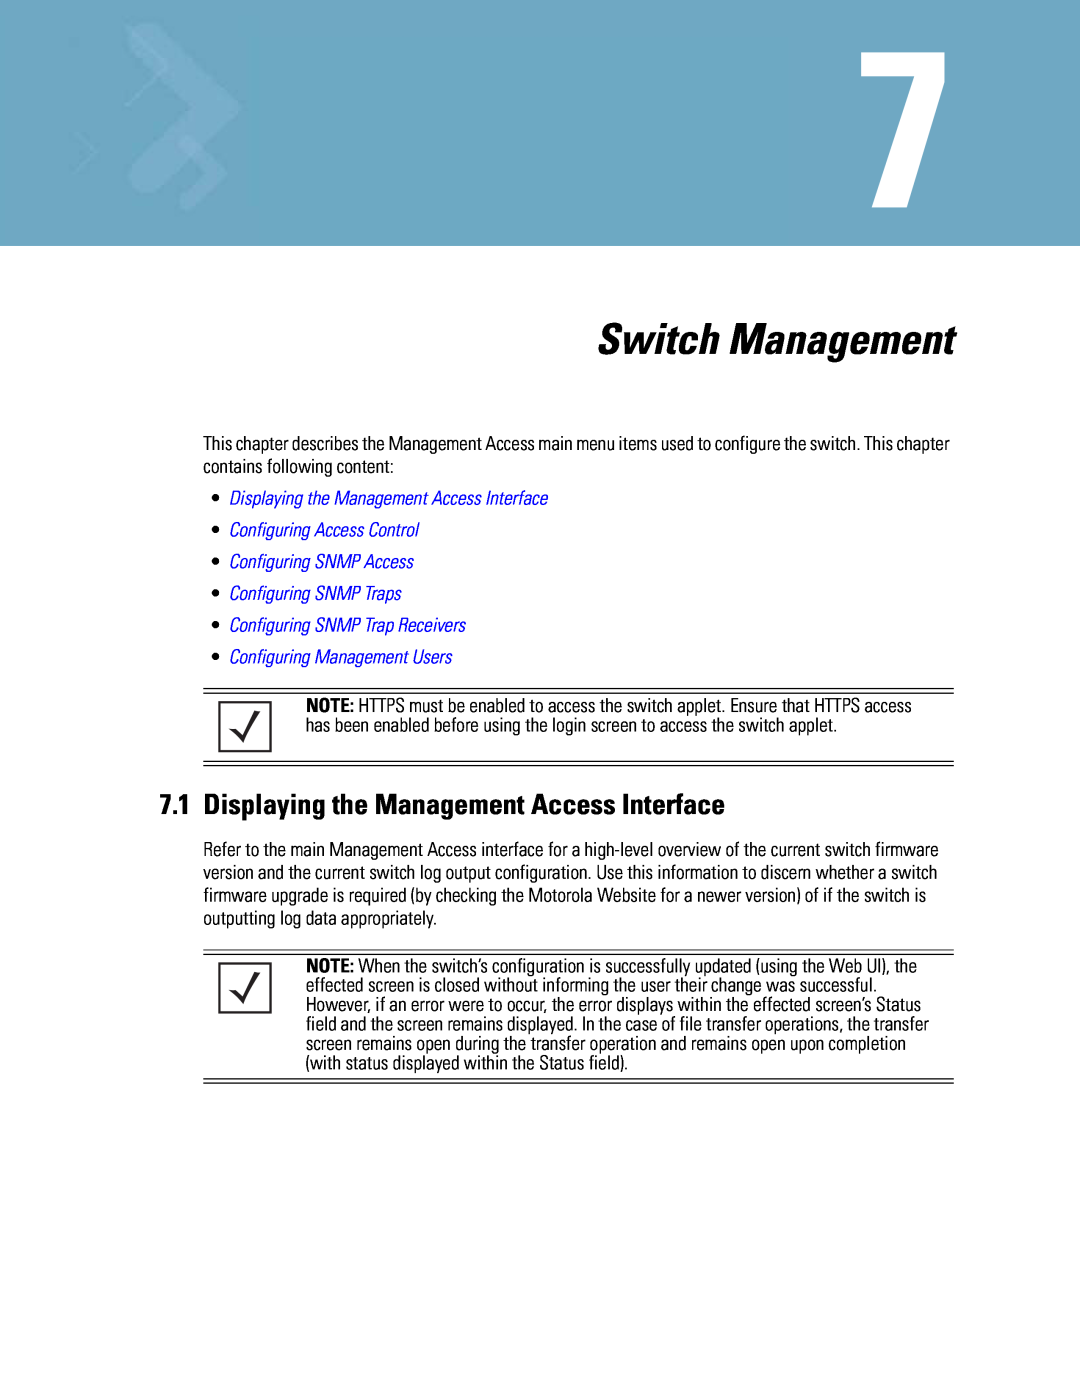 Motorola WS5100 manual Switch Management, •Displaying the Management Access Interface, •Configuring Access Control 